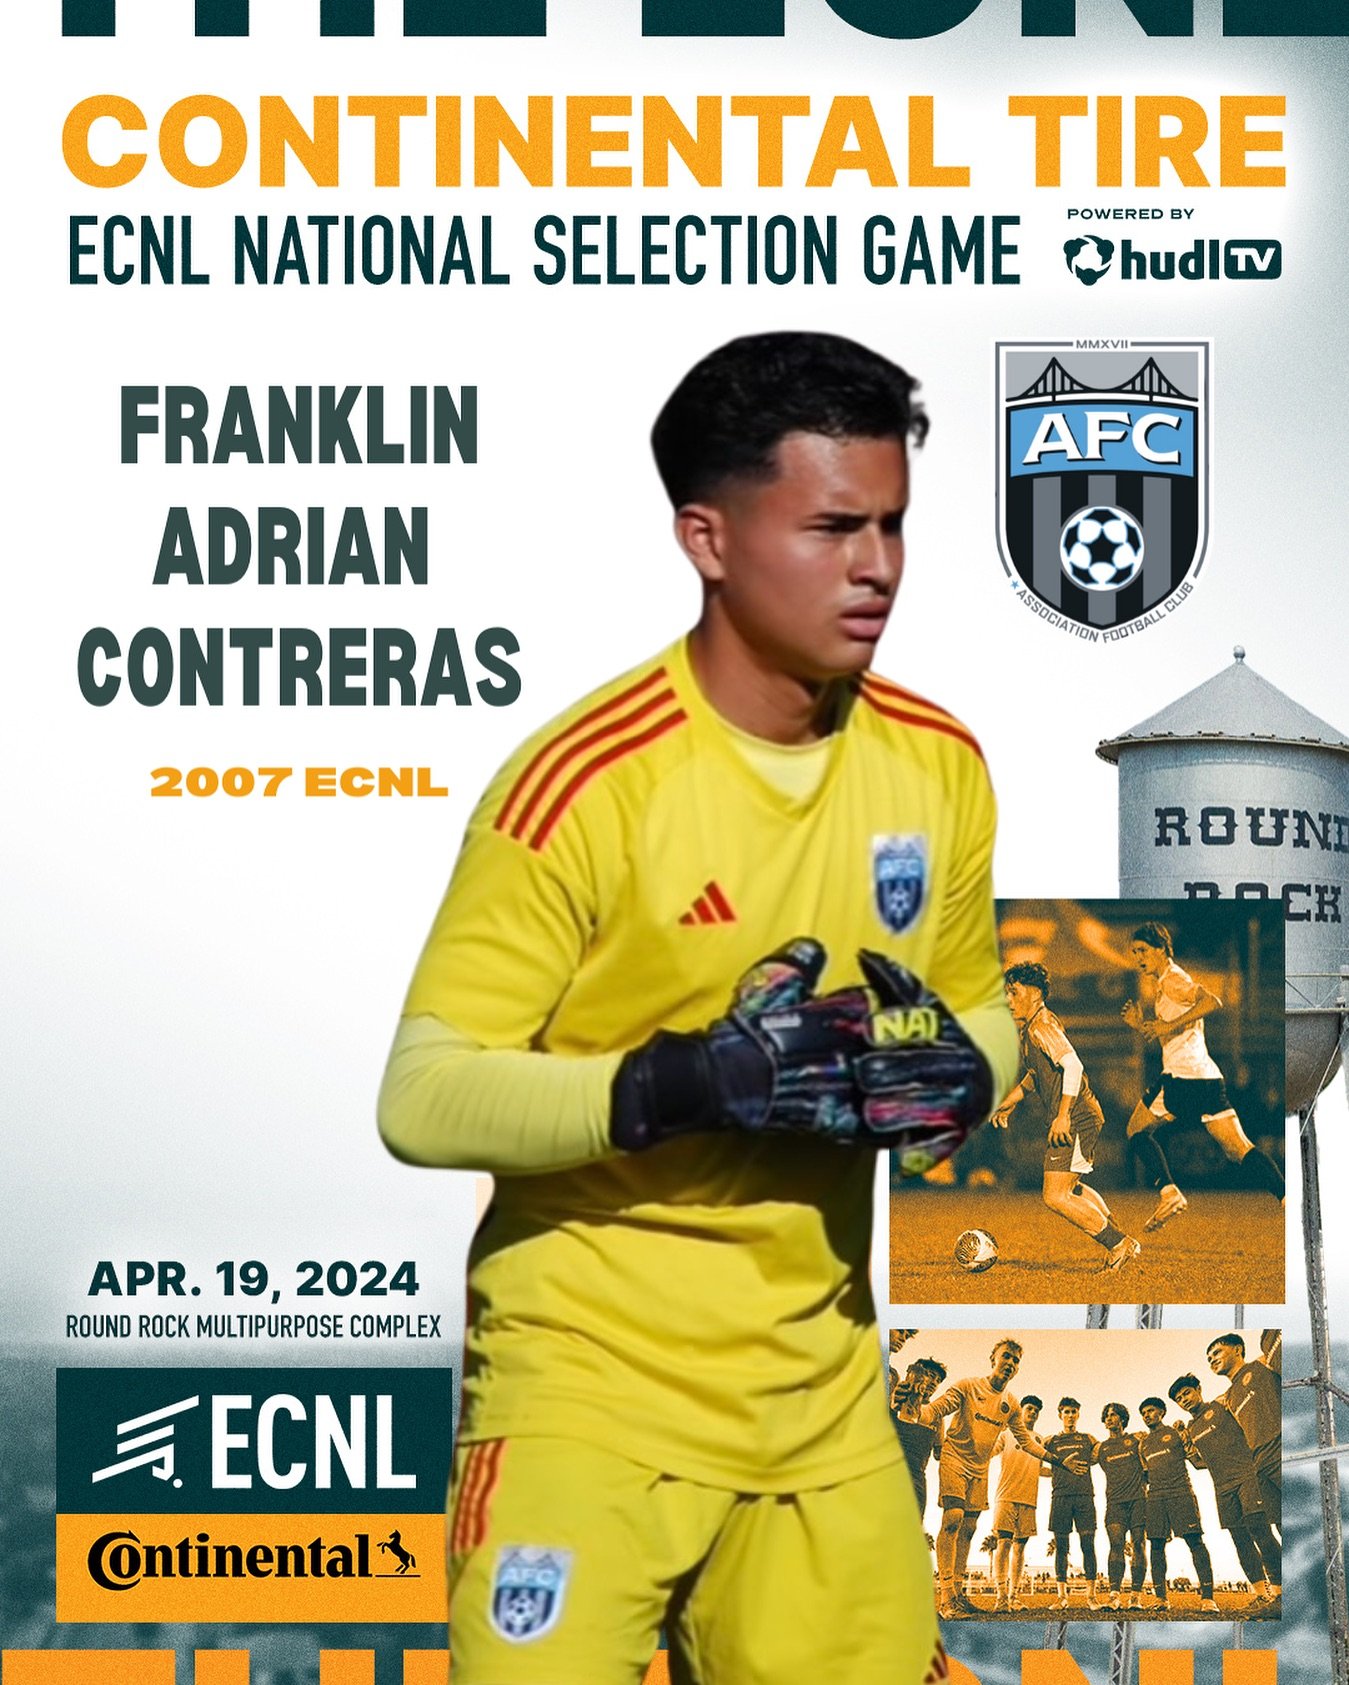 Let&rsquo;s go!!! Congrats to Franklin Adrian Contreras on being selected to participate in the National Selection Game at this weekend&rsquo;s ECNL event in Texas! Well done Adrian!!! #Elevate #WeAreAFC #WeAreTheEastBay